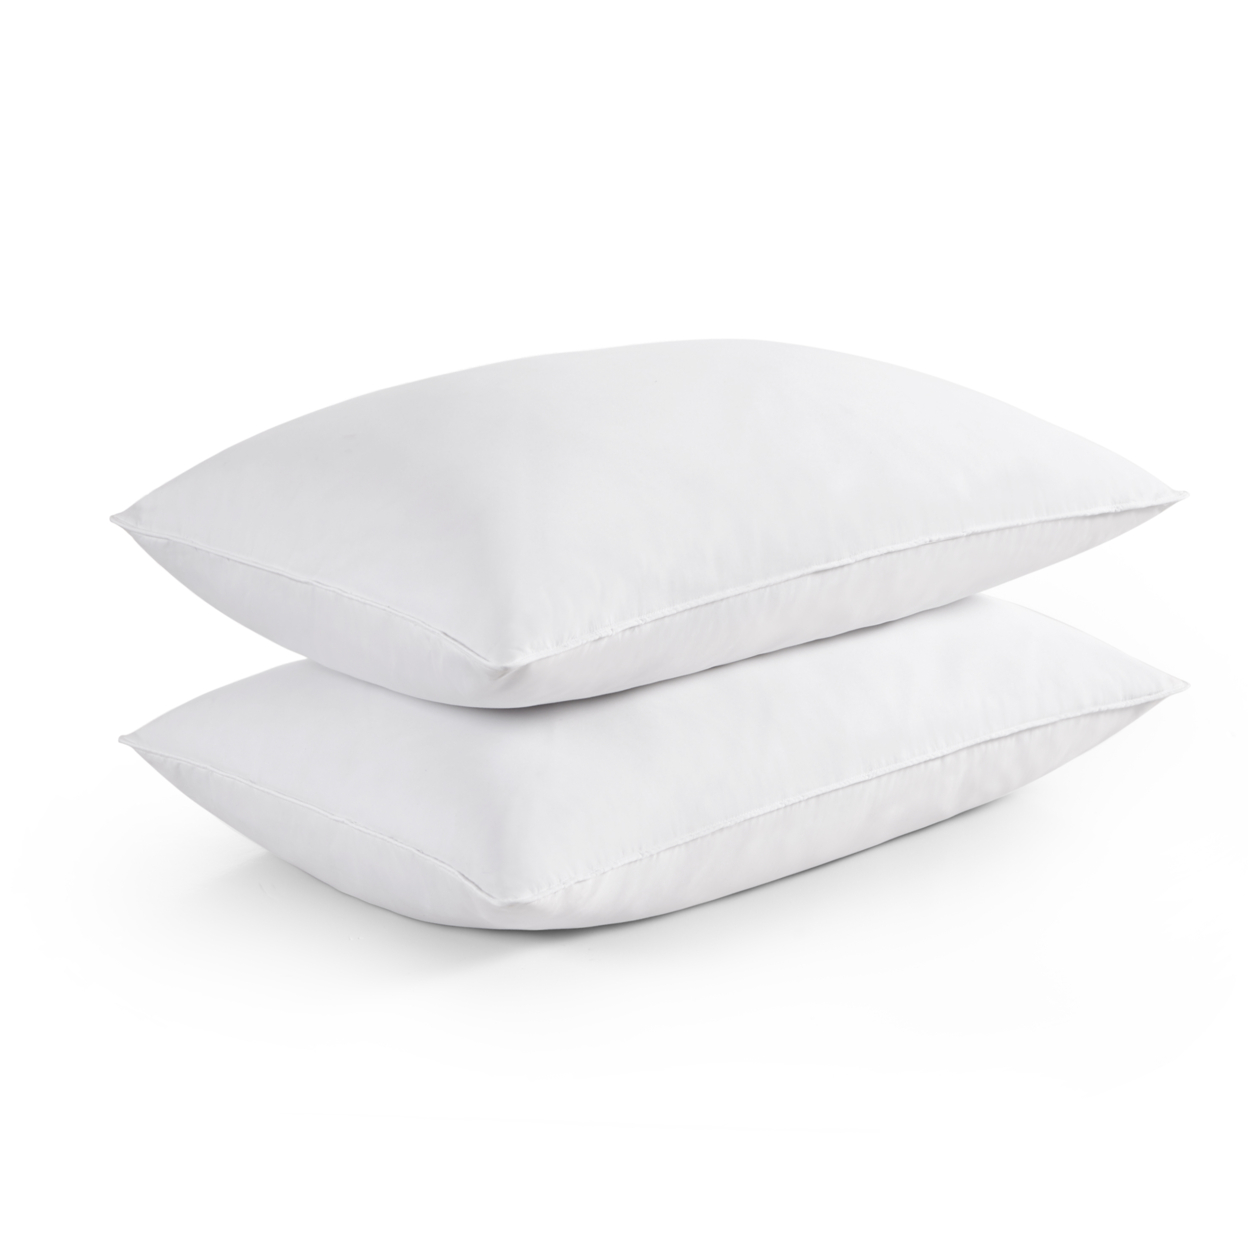 2 Pack Goose Feather Pillow - Standard